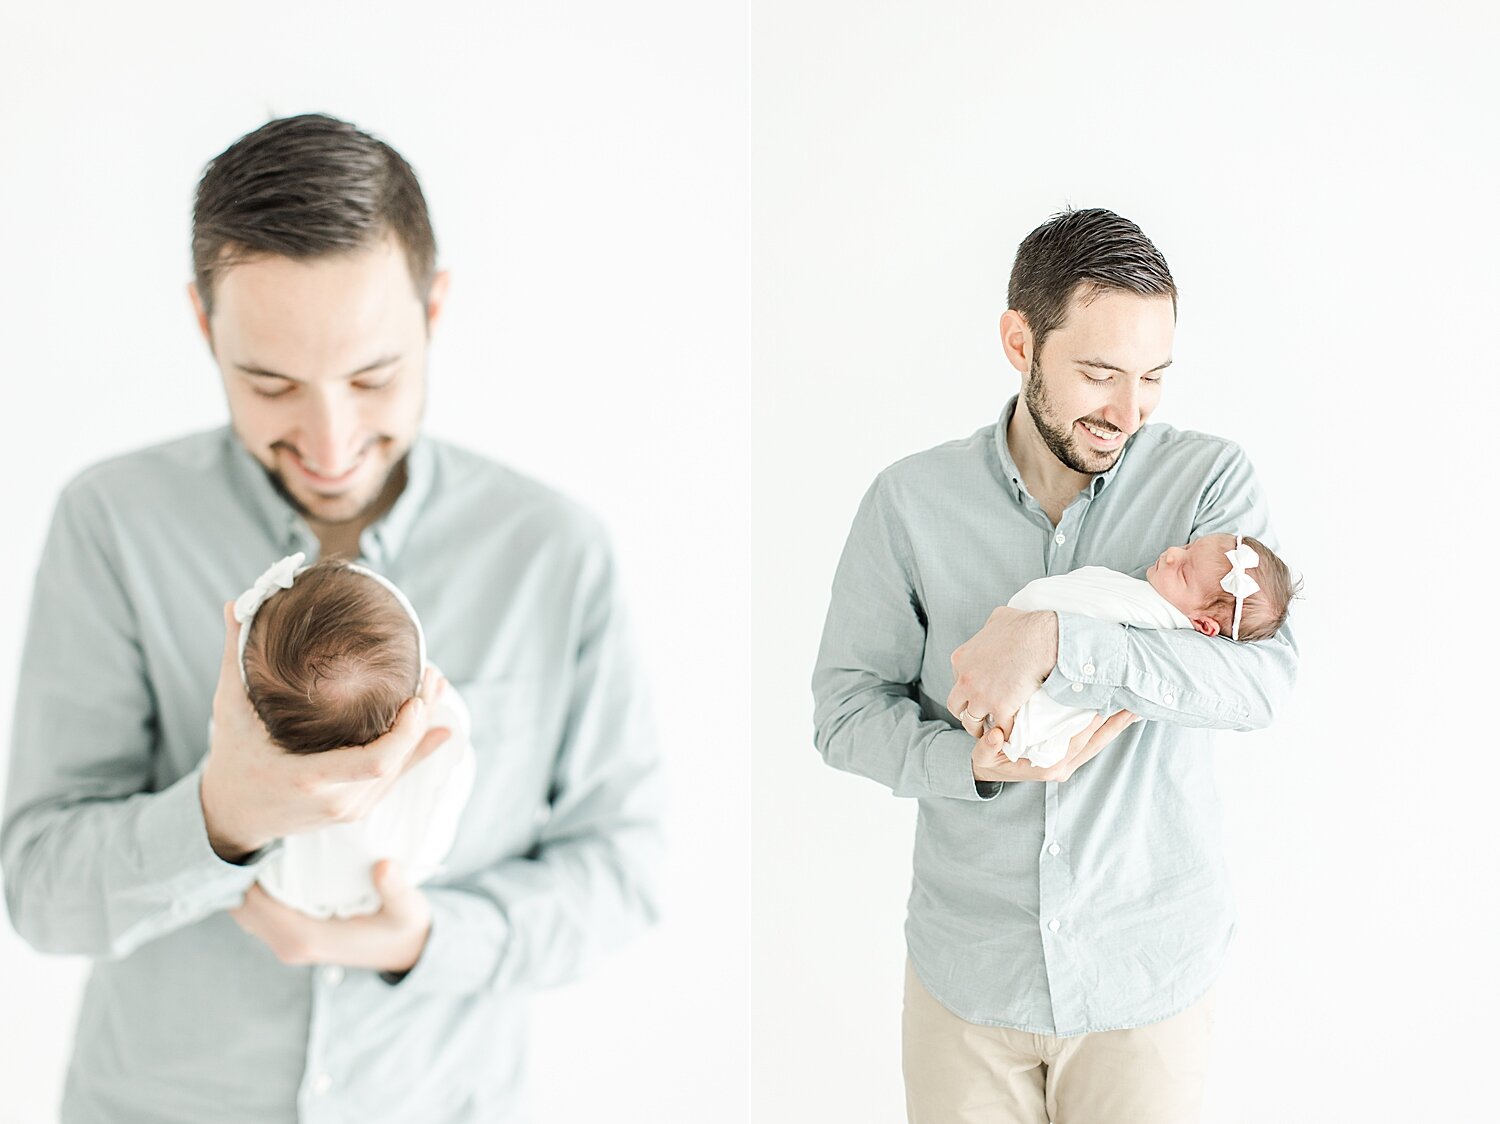 Dad and his baby girl | Kristin Wood Photography